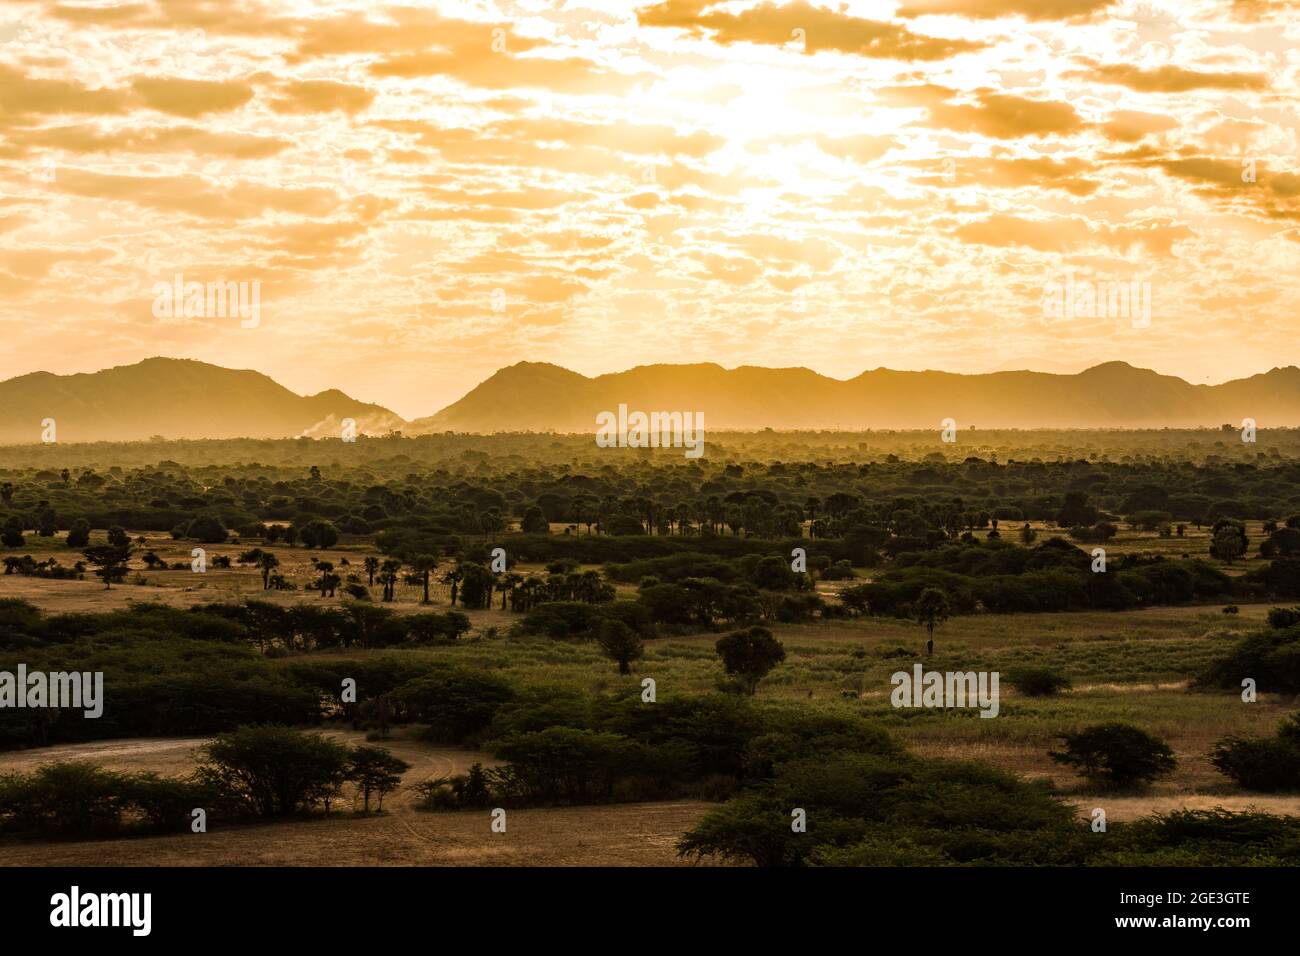 The sunrise over the tree fields of Bagan in Myanmar as seen from a hot air balloon Stock Photo